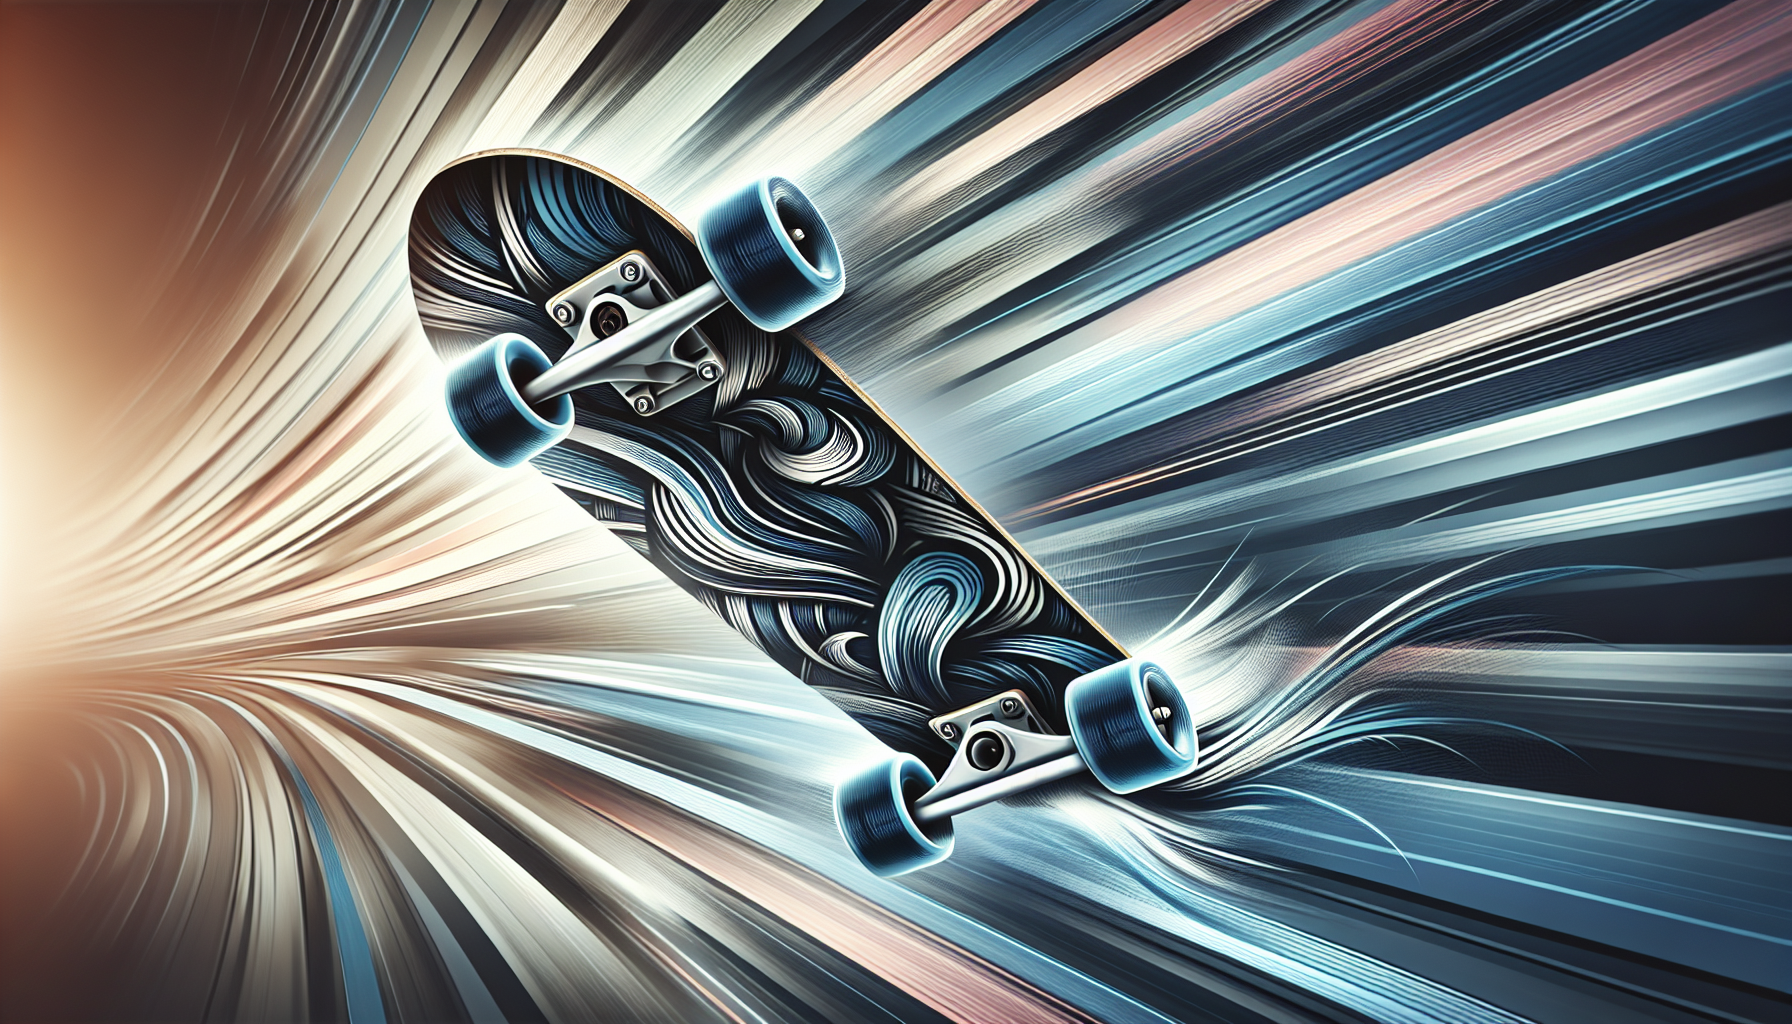 Can You Provide Insights On Enhancing Skateboard Flow And Fluidity In Your Runs?